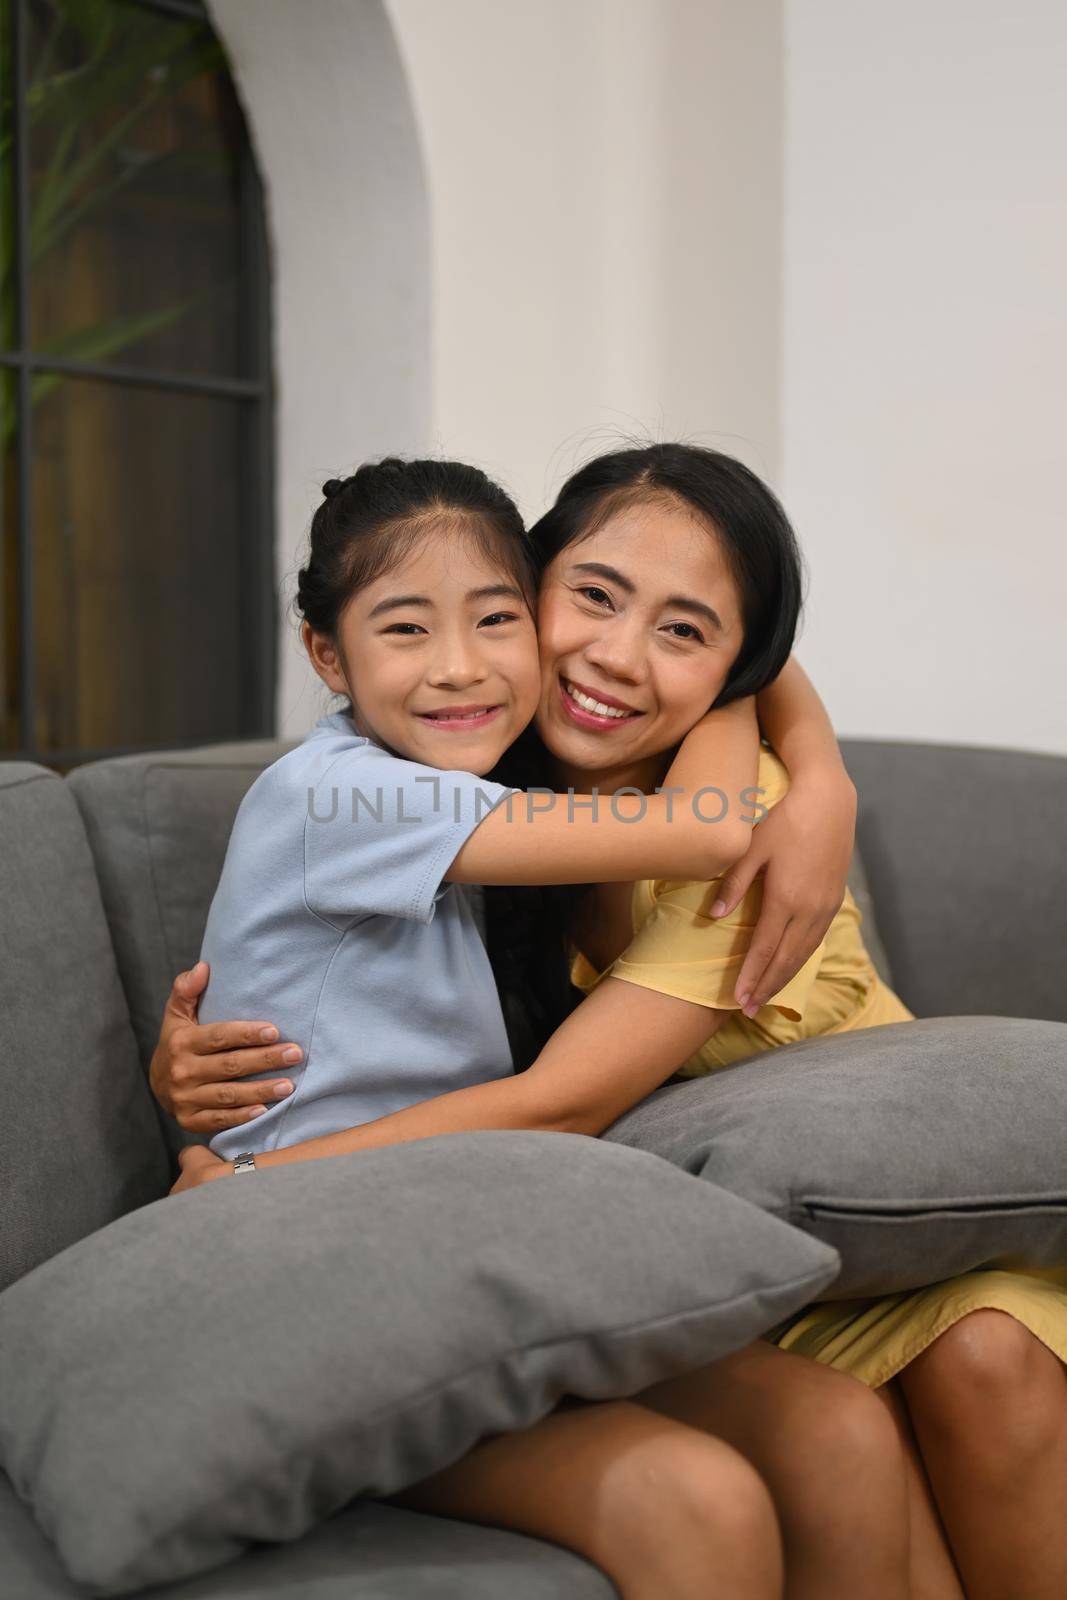 Adorable asian child cuddling mother and smiling at camera. Love and support in family relationships concept.